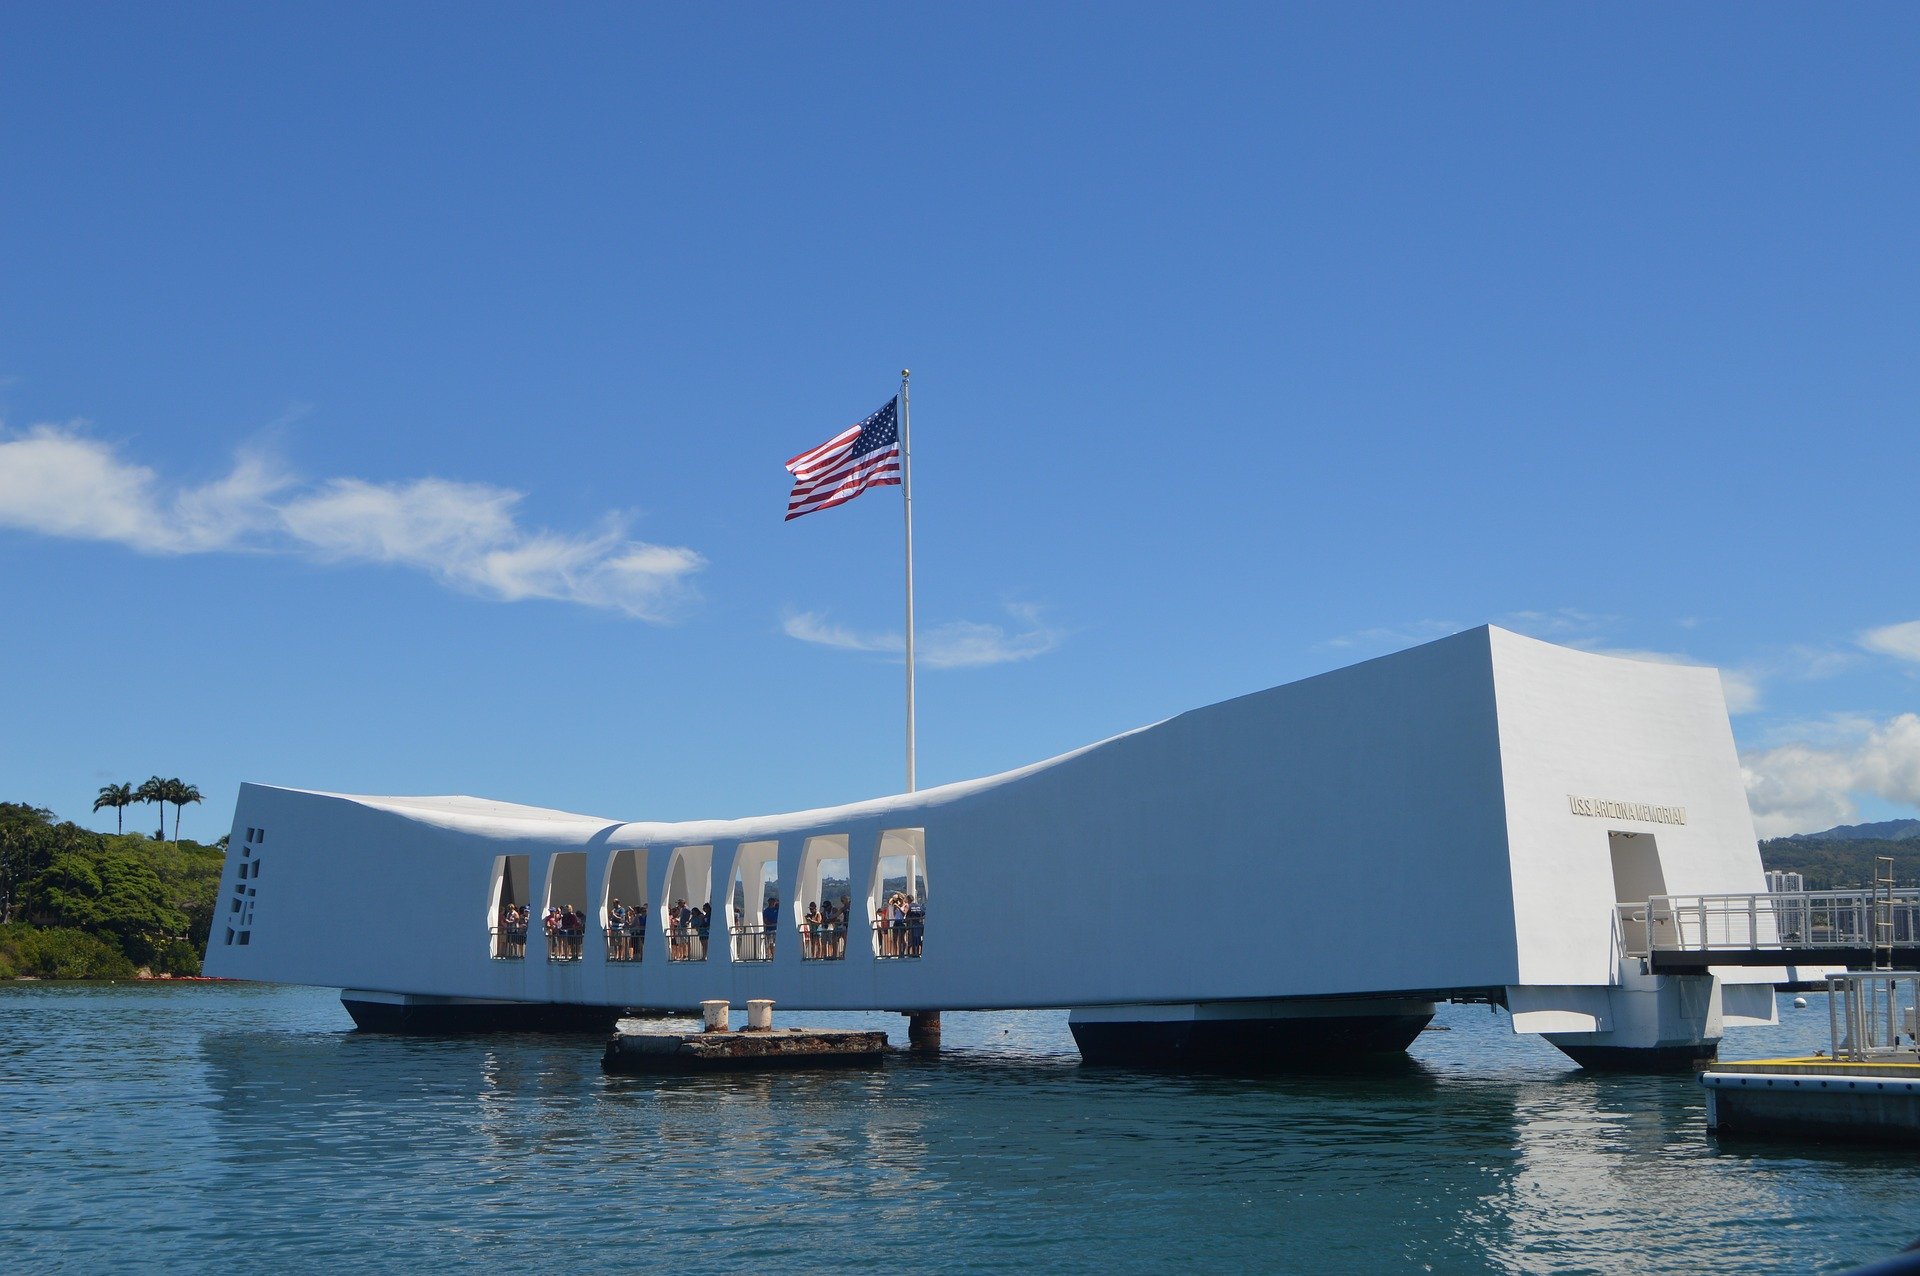 Remembering Pearl Harbor The Day of Infamy December 7, 1941 WWII